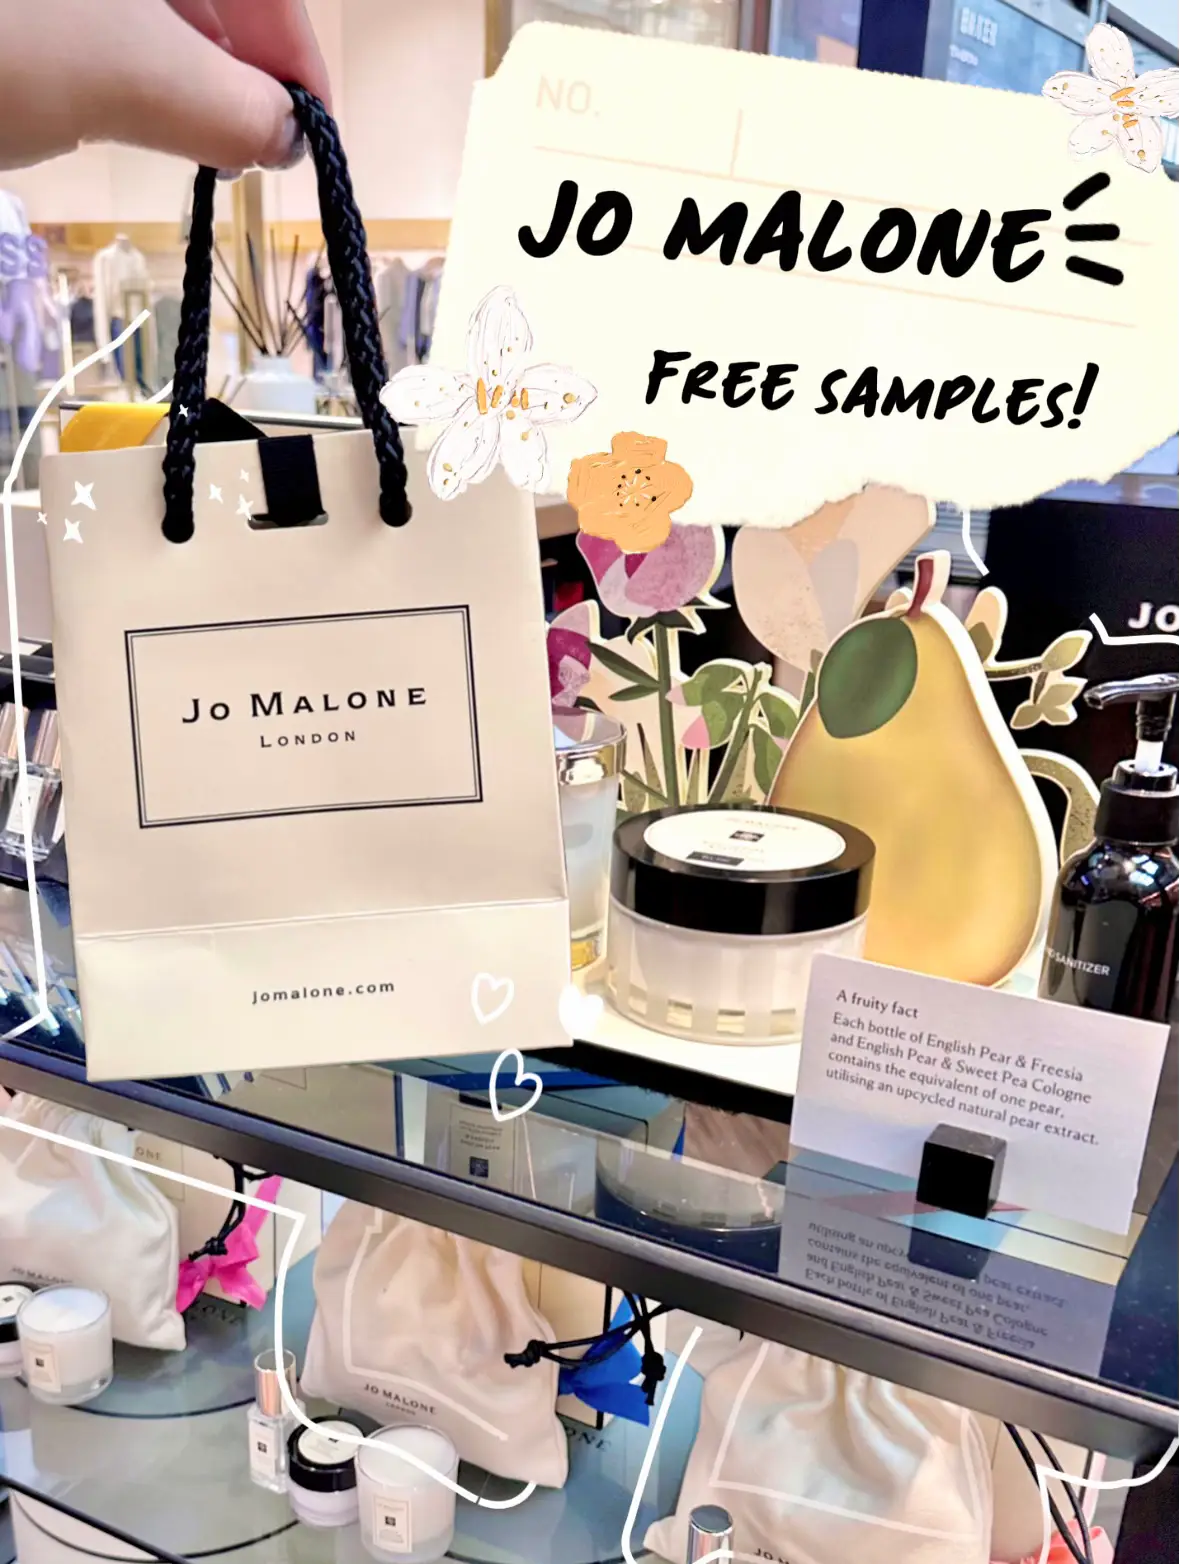 4 Jo Malone FREEBIES for you!'s images(0)